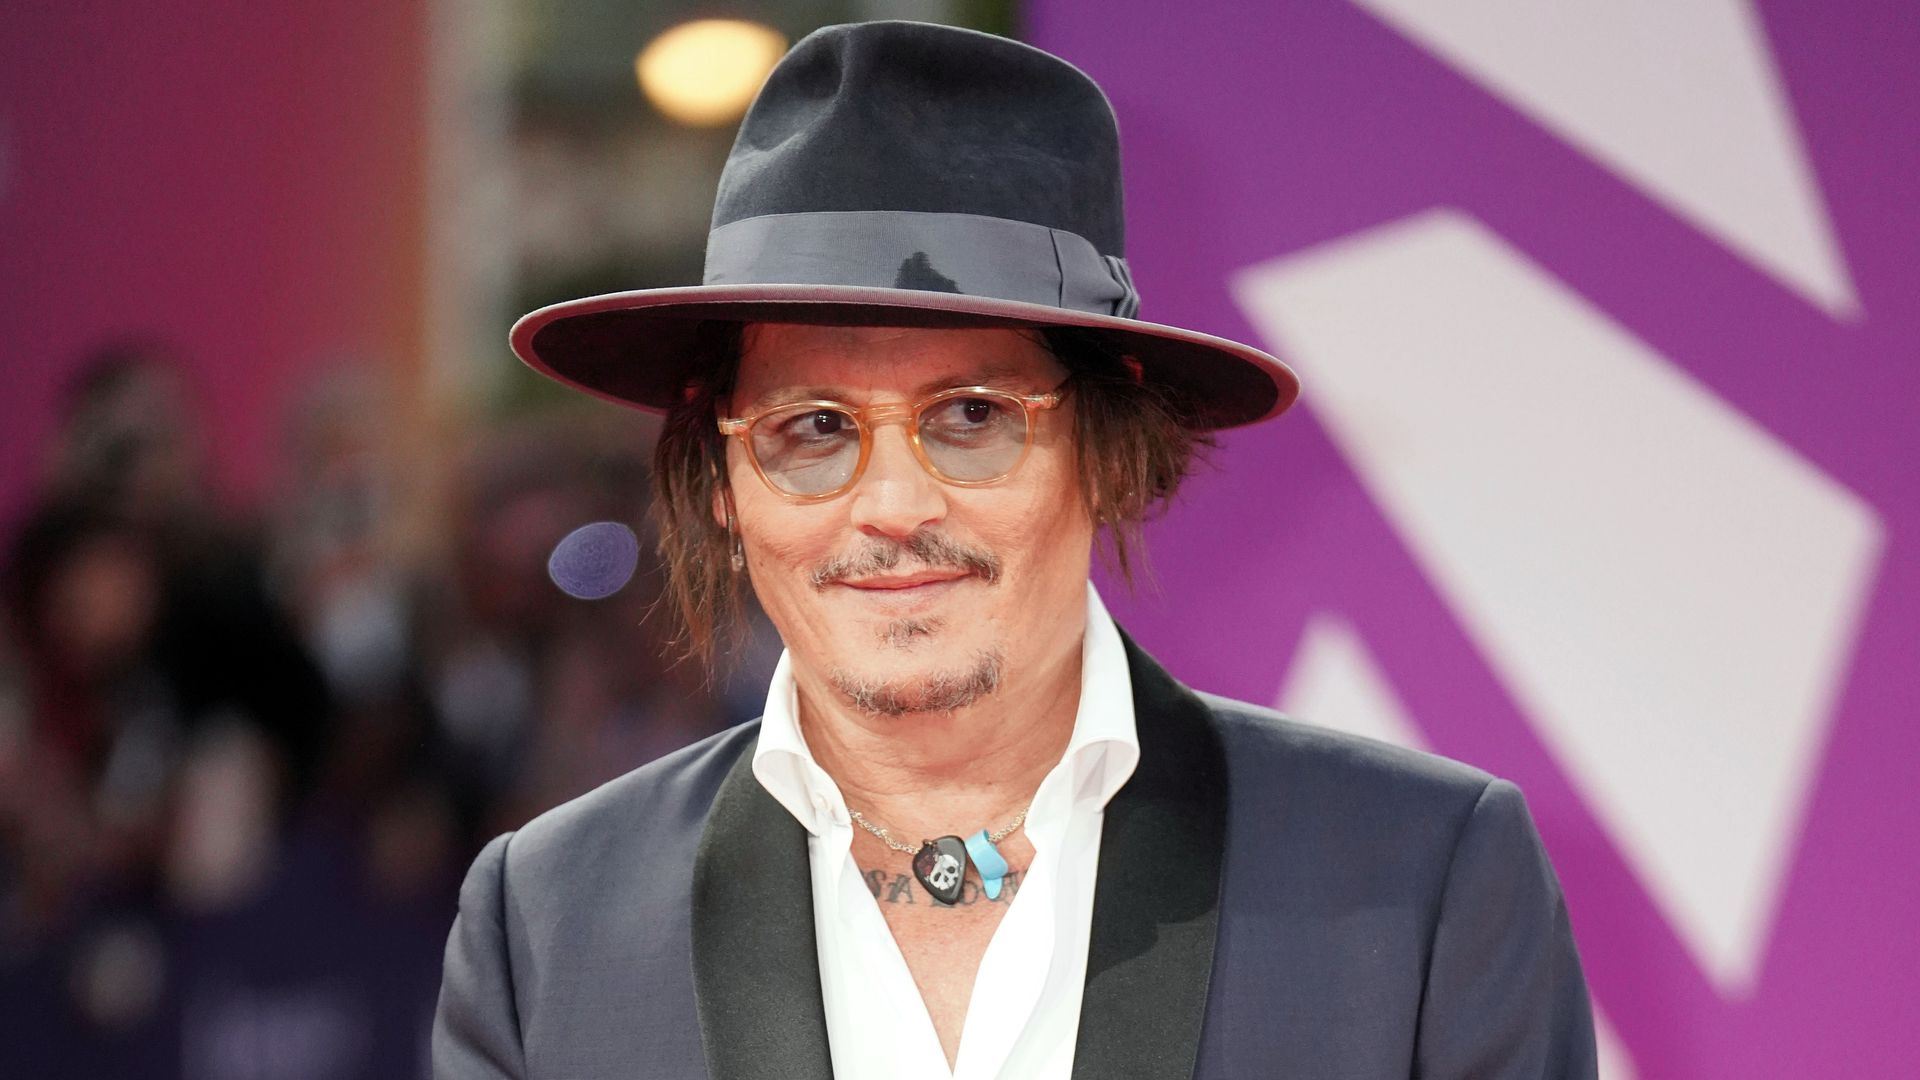 Johnny Depp smiling on a red carpet and looking to the right, he is wearing a hat